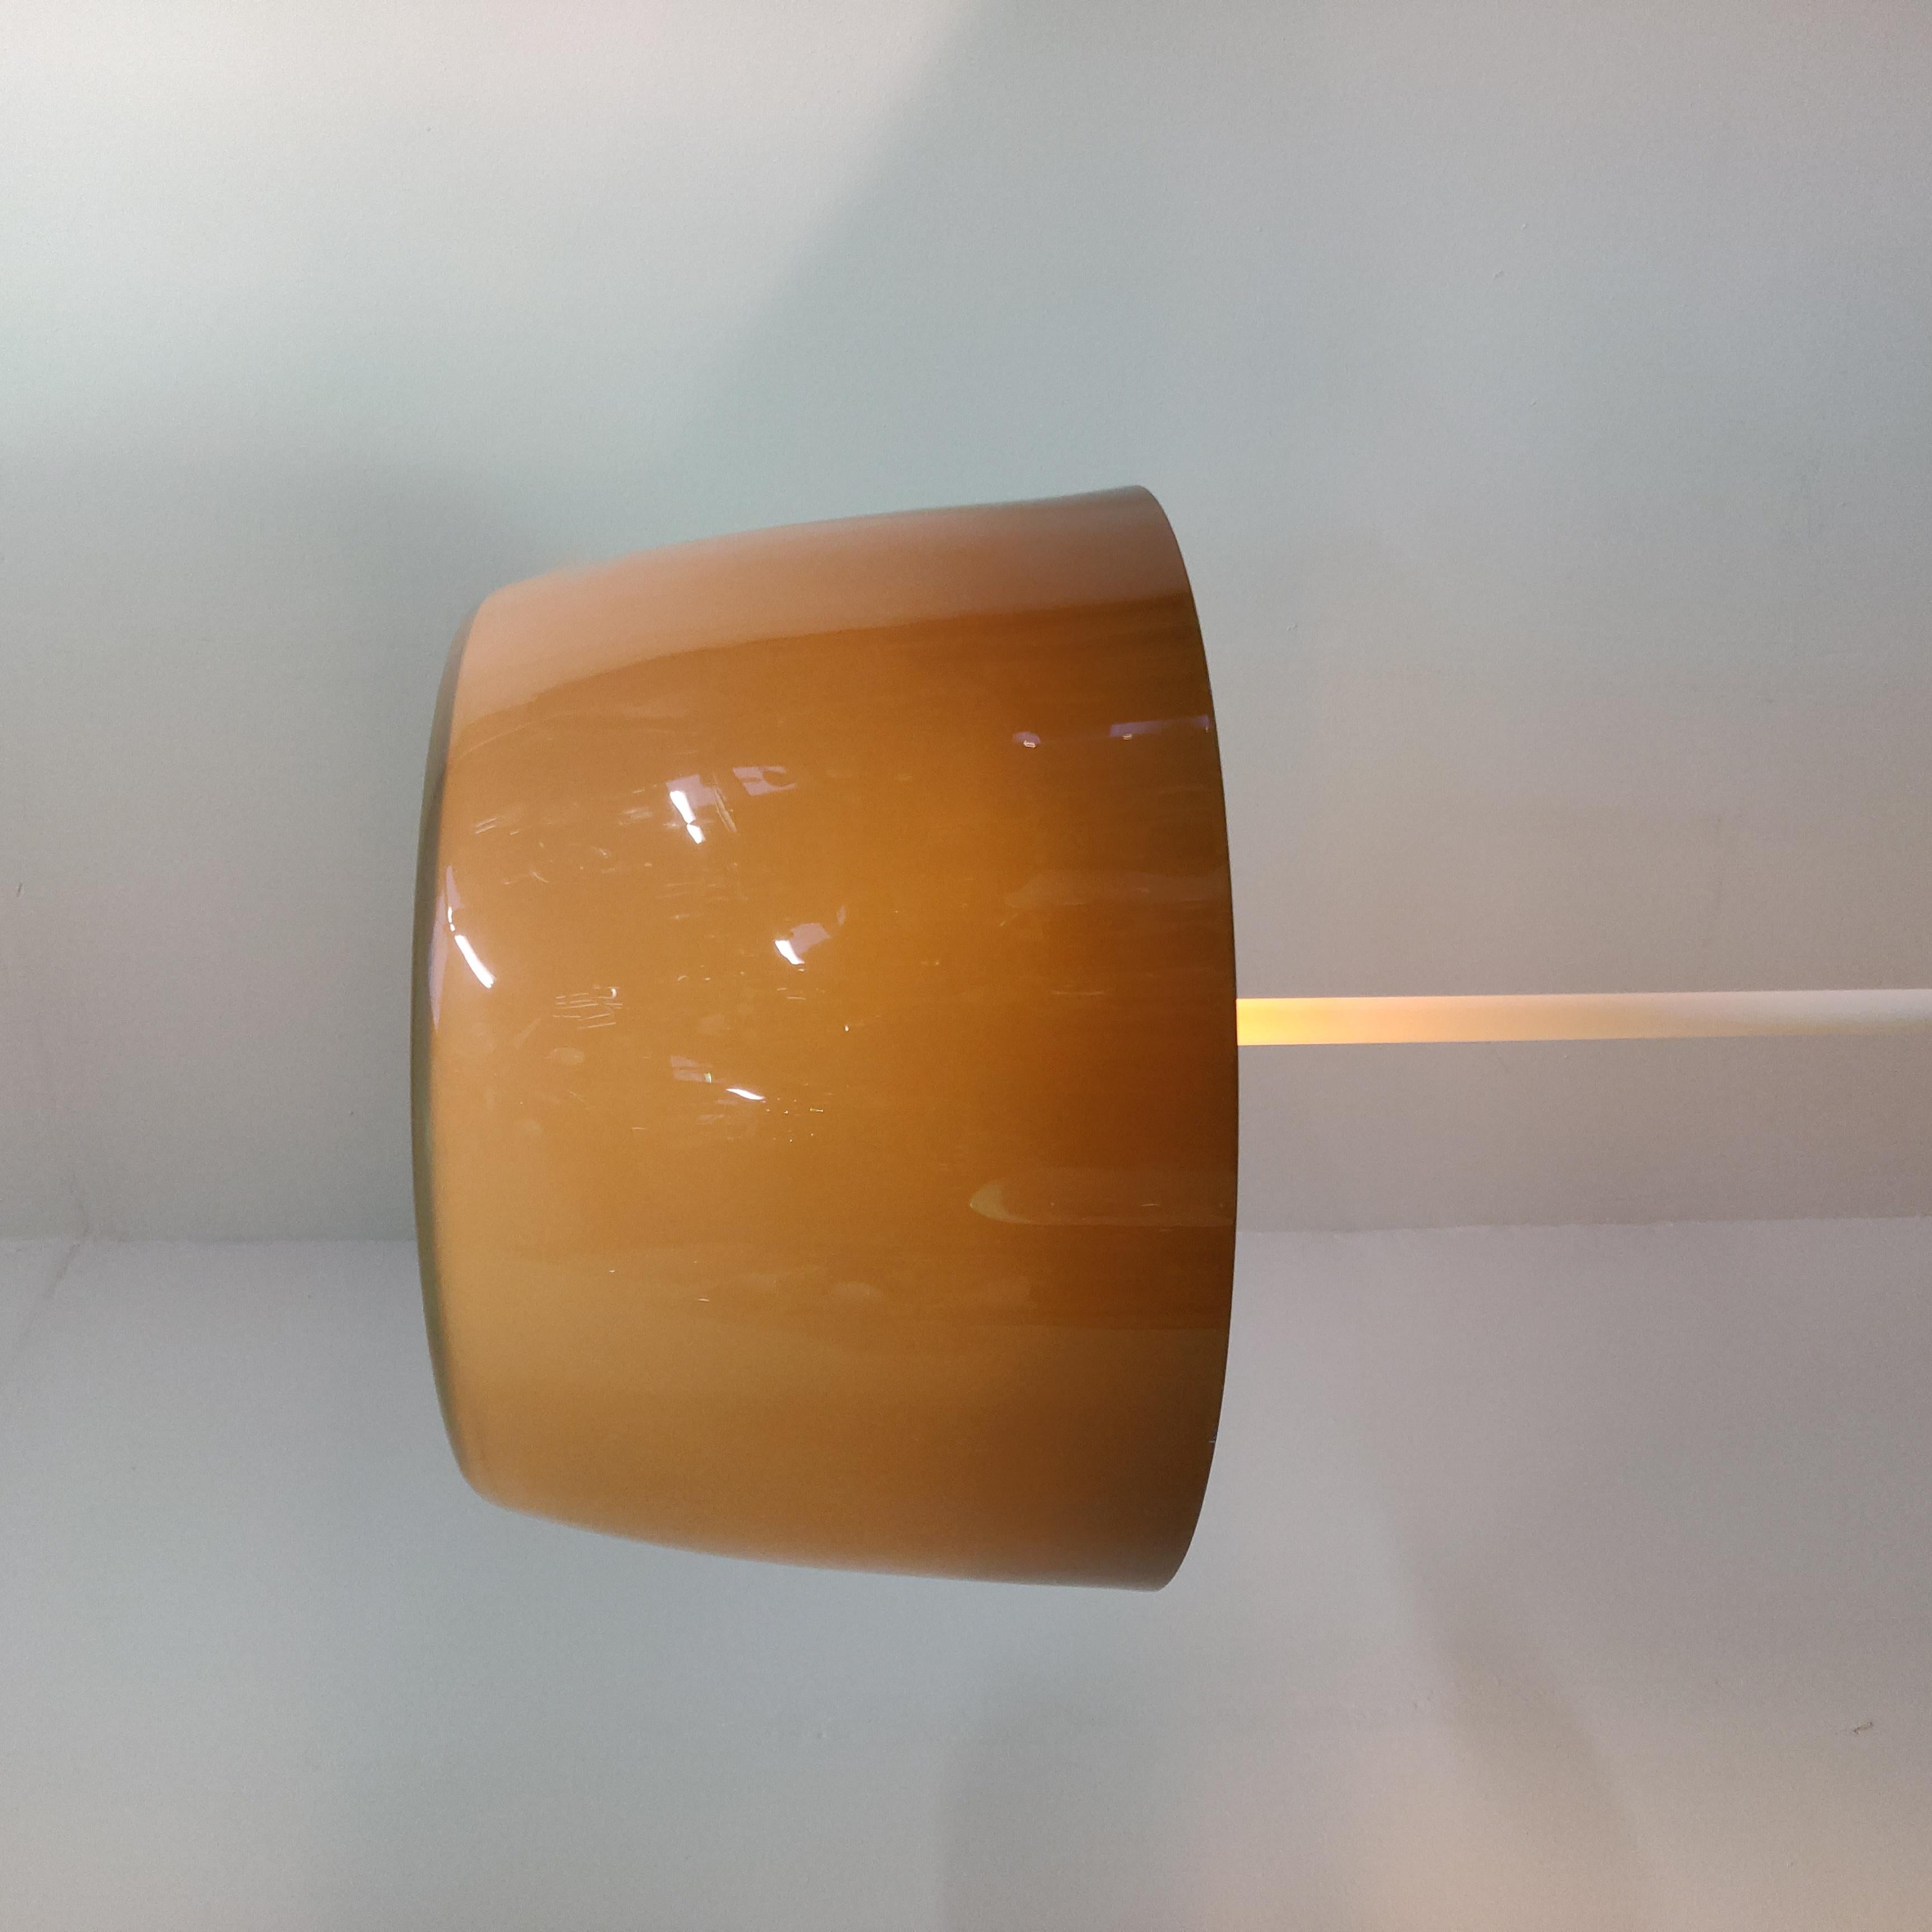 European Minimalistic Floor lamp with Lucent brown acrylic lamp shade, 1970s.